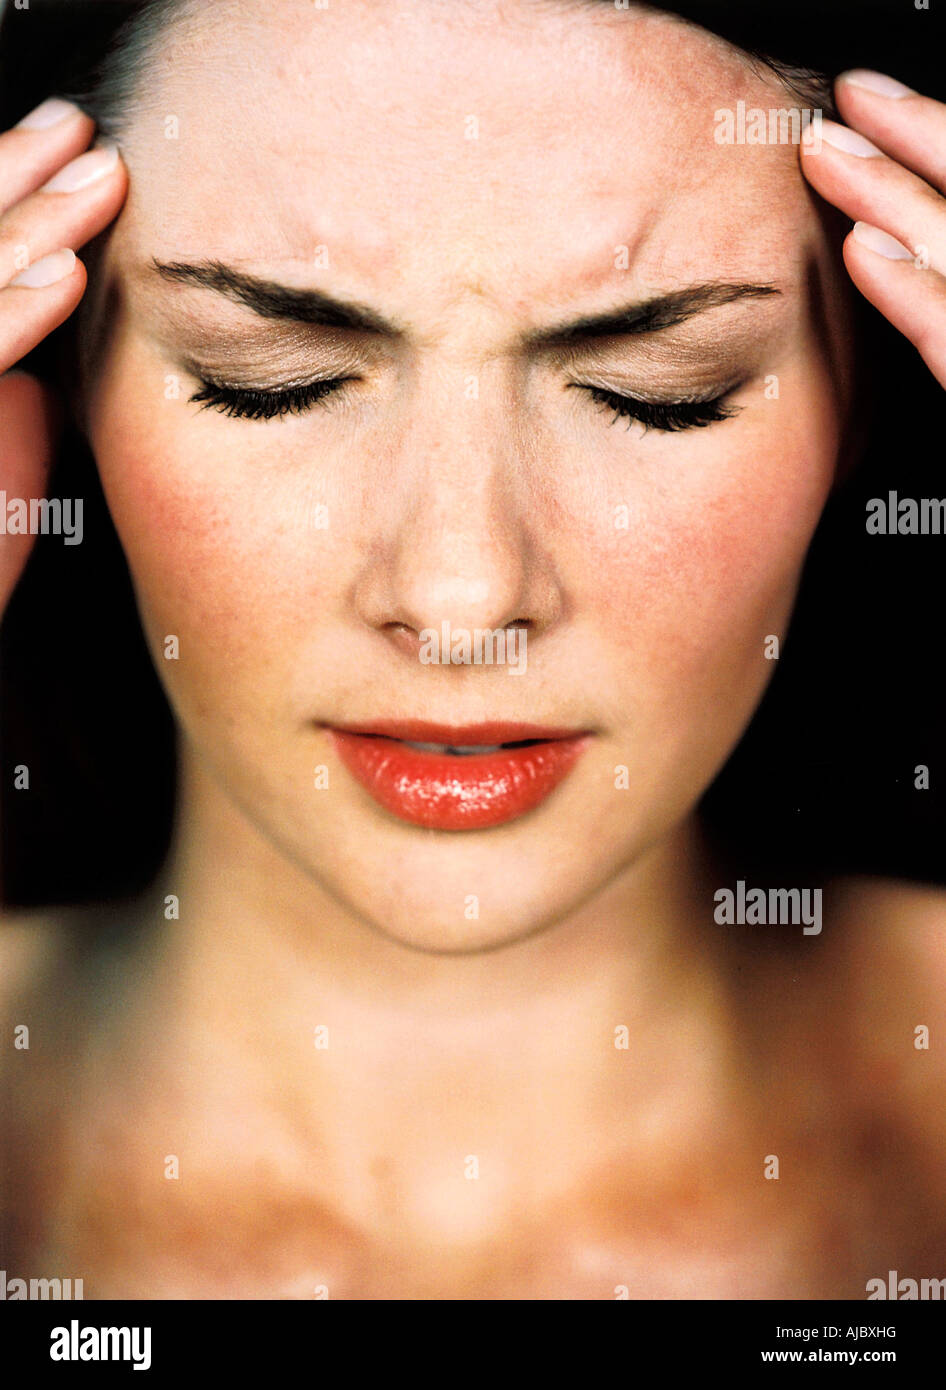 Caucasian Woman Holding Her Head in Pain Stock Photo